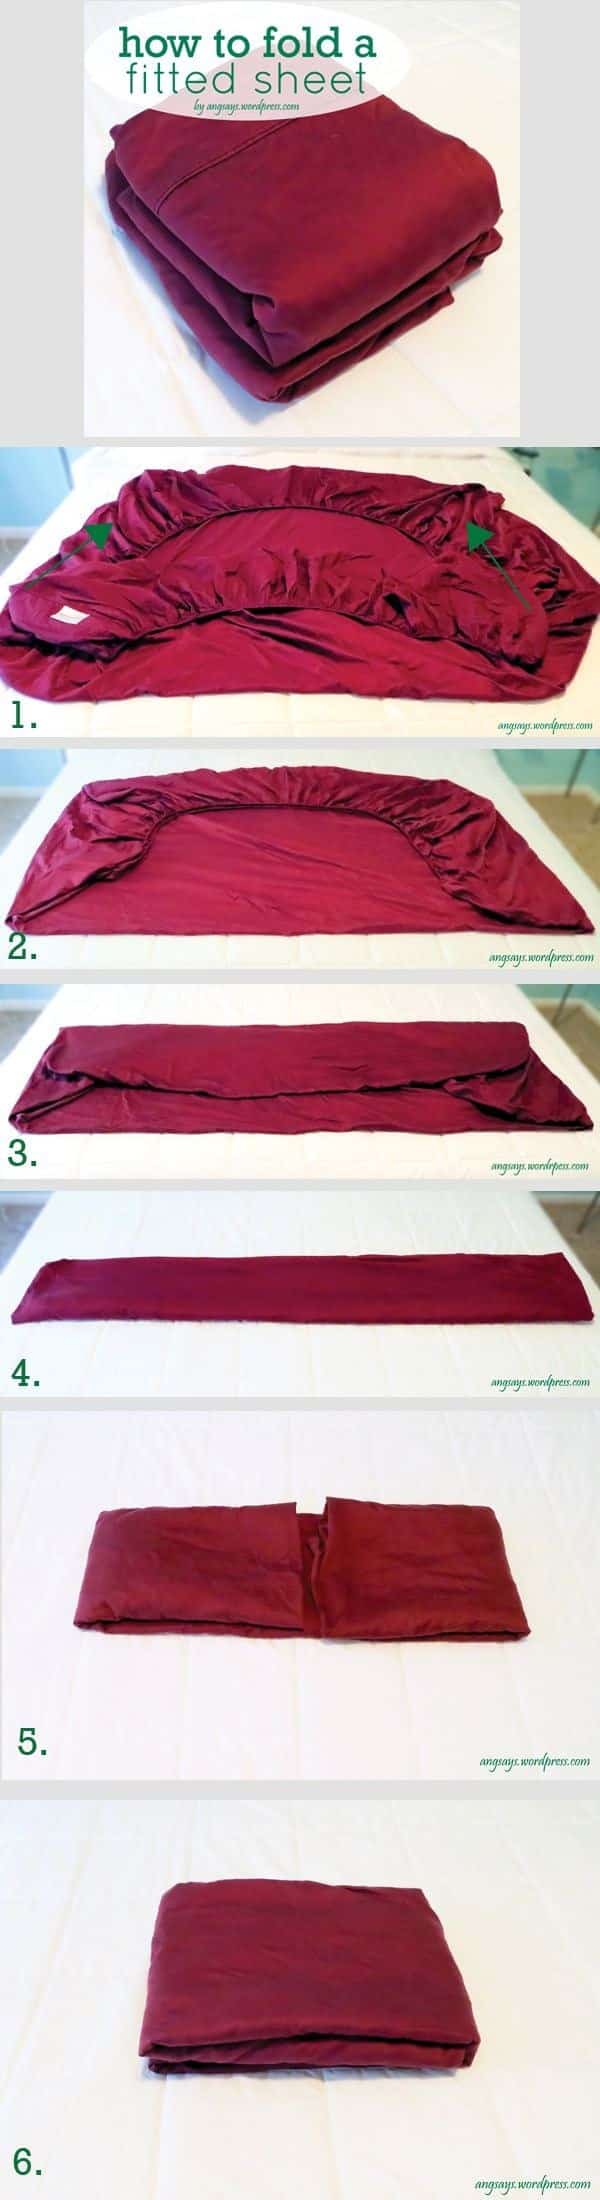 A Fitted Sheet